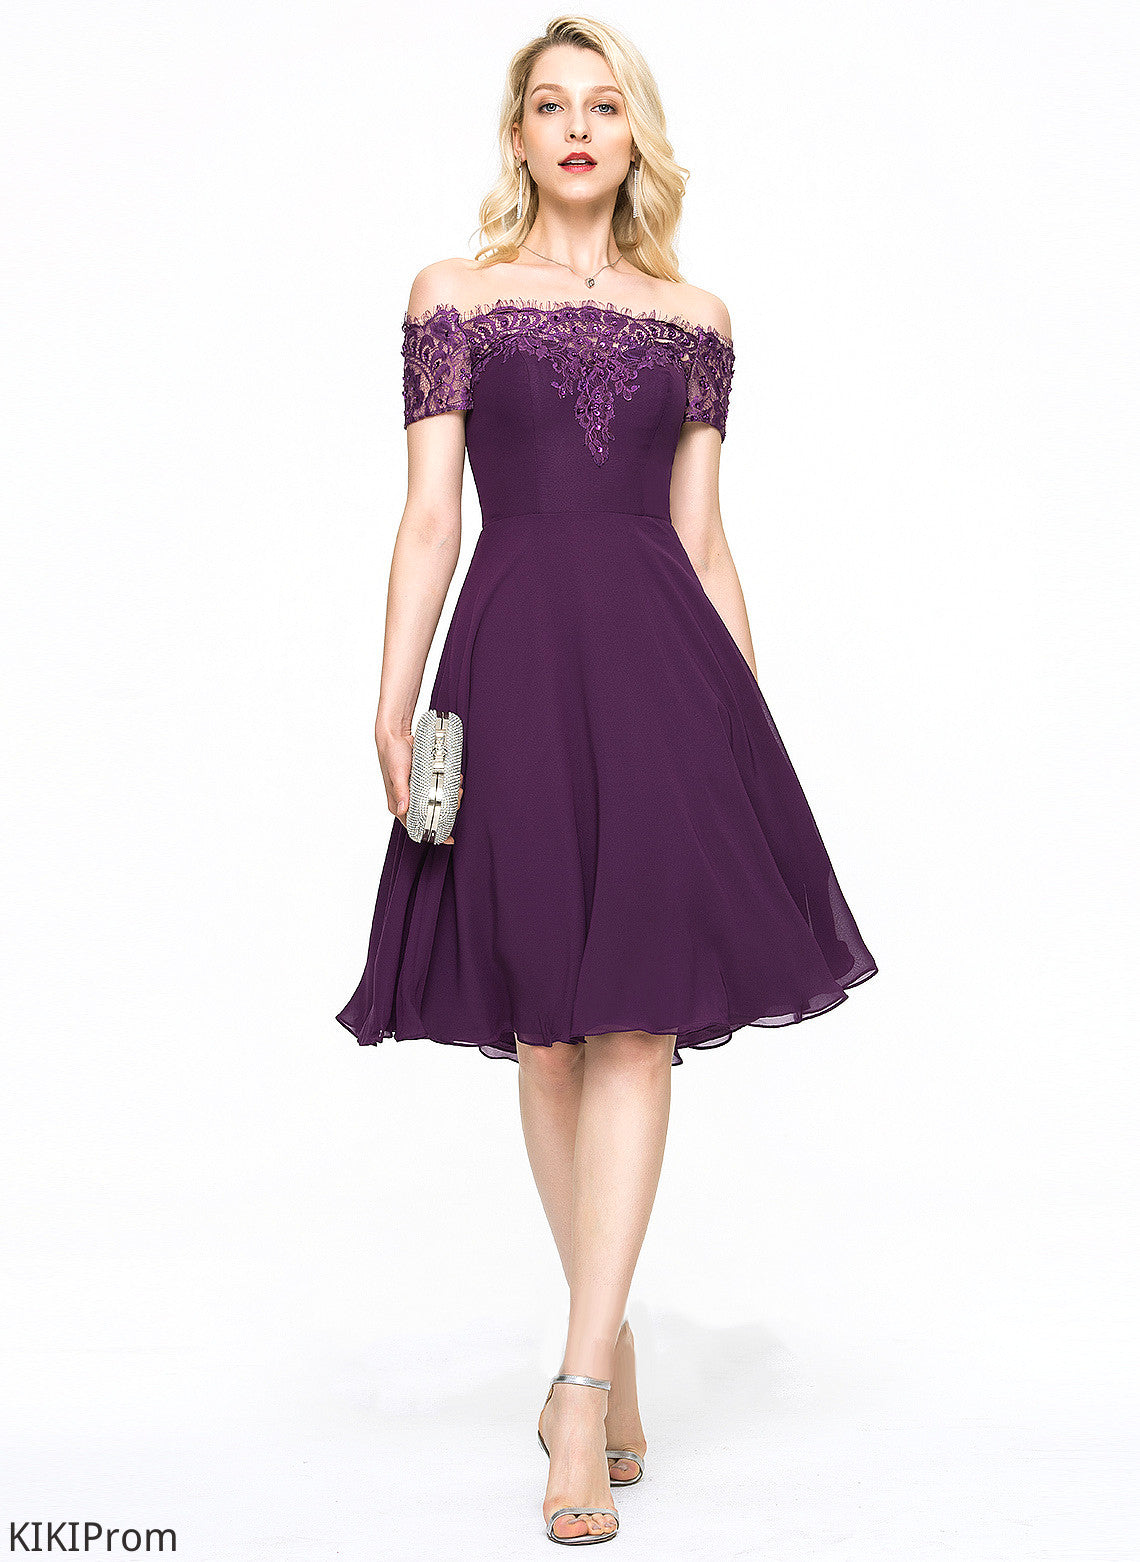 Dress Homecoming Dresses Fiona Chiffon A-Line Beading Off-the-Shoulder Lace Homecoming With Knee-Length